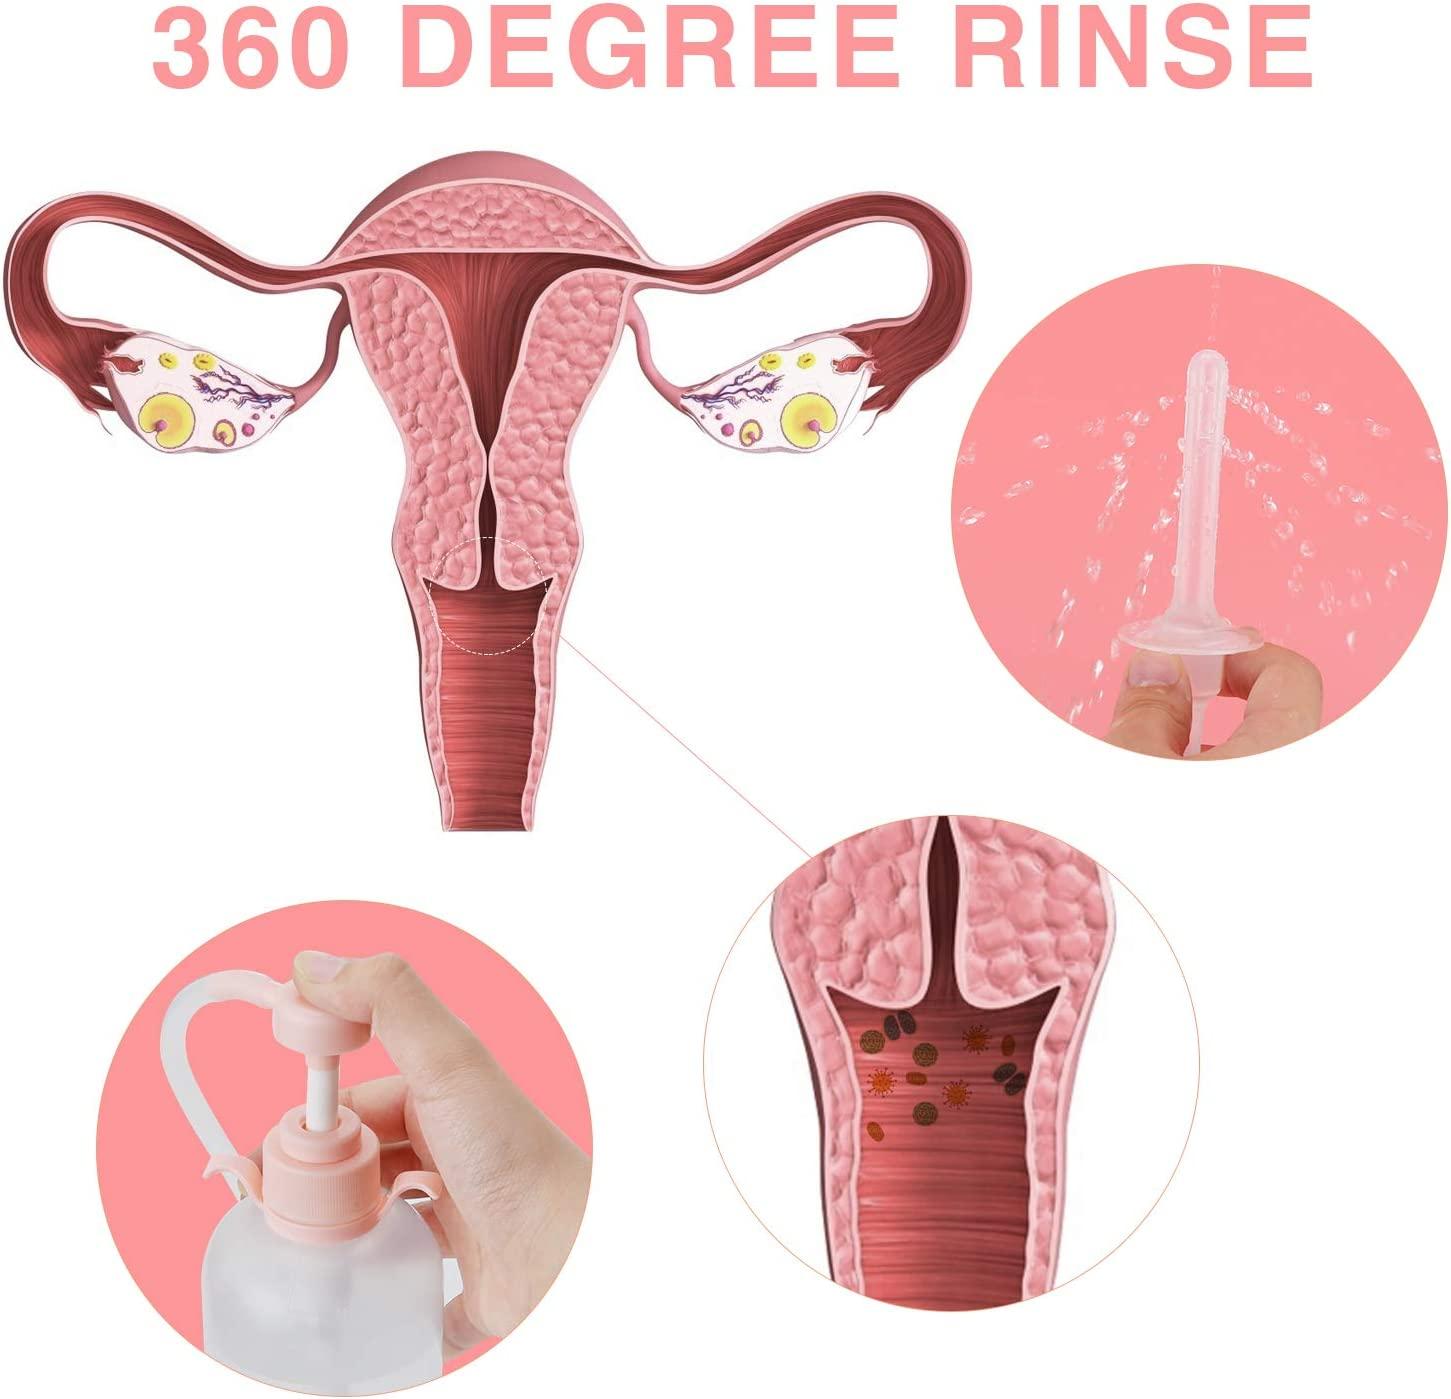 Vaginal Douche for Women Vaginal Cleansing System Douche Cleaner Anal Douche Cleaning Kit 600 ml Capacity with 3 Nozzles photo photo